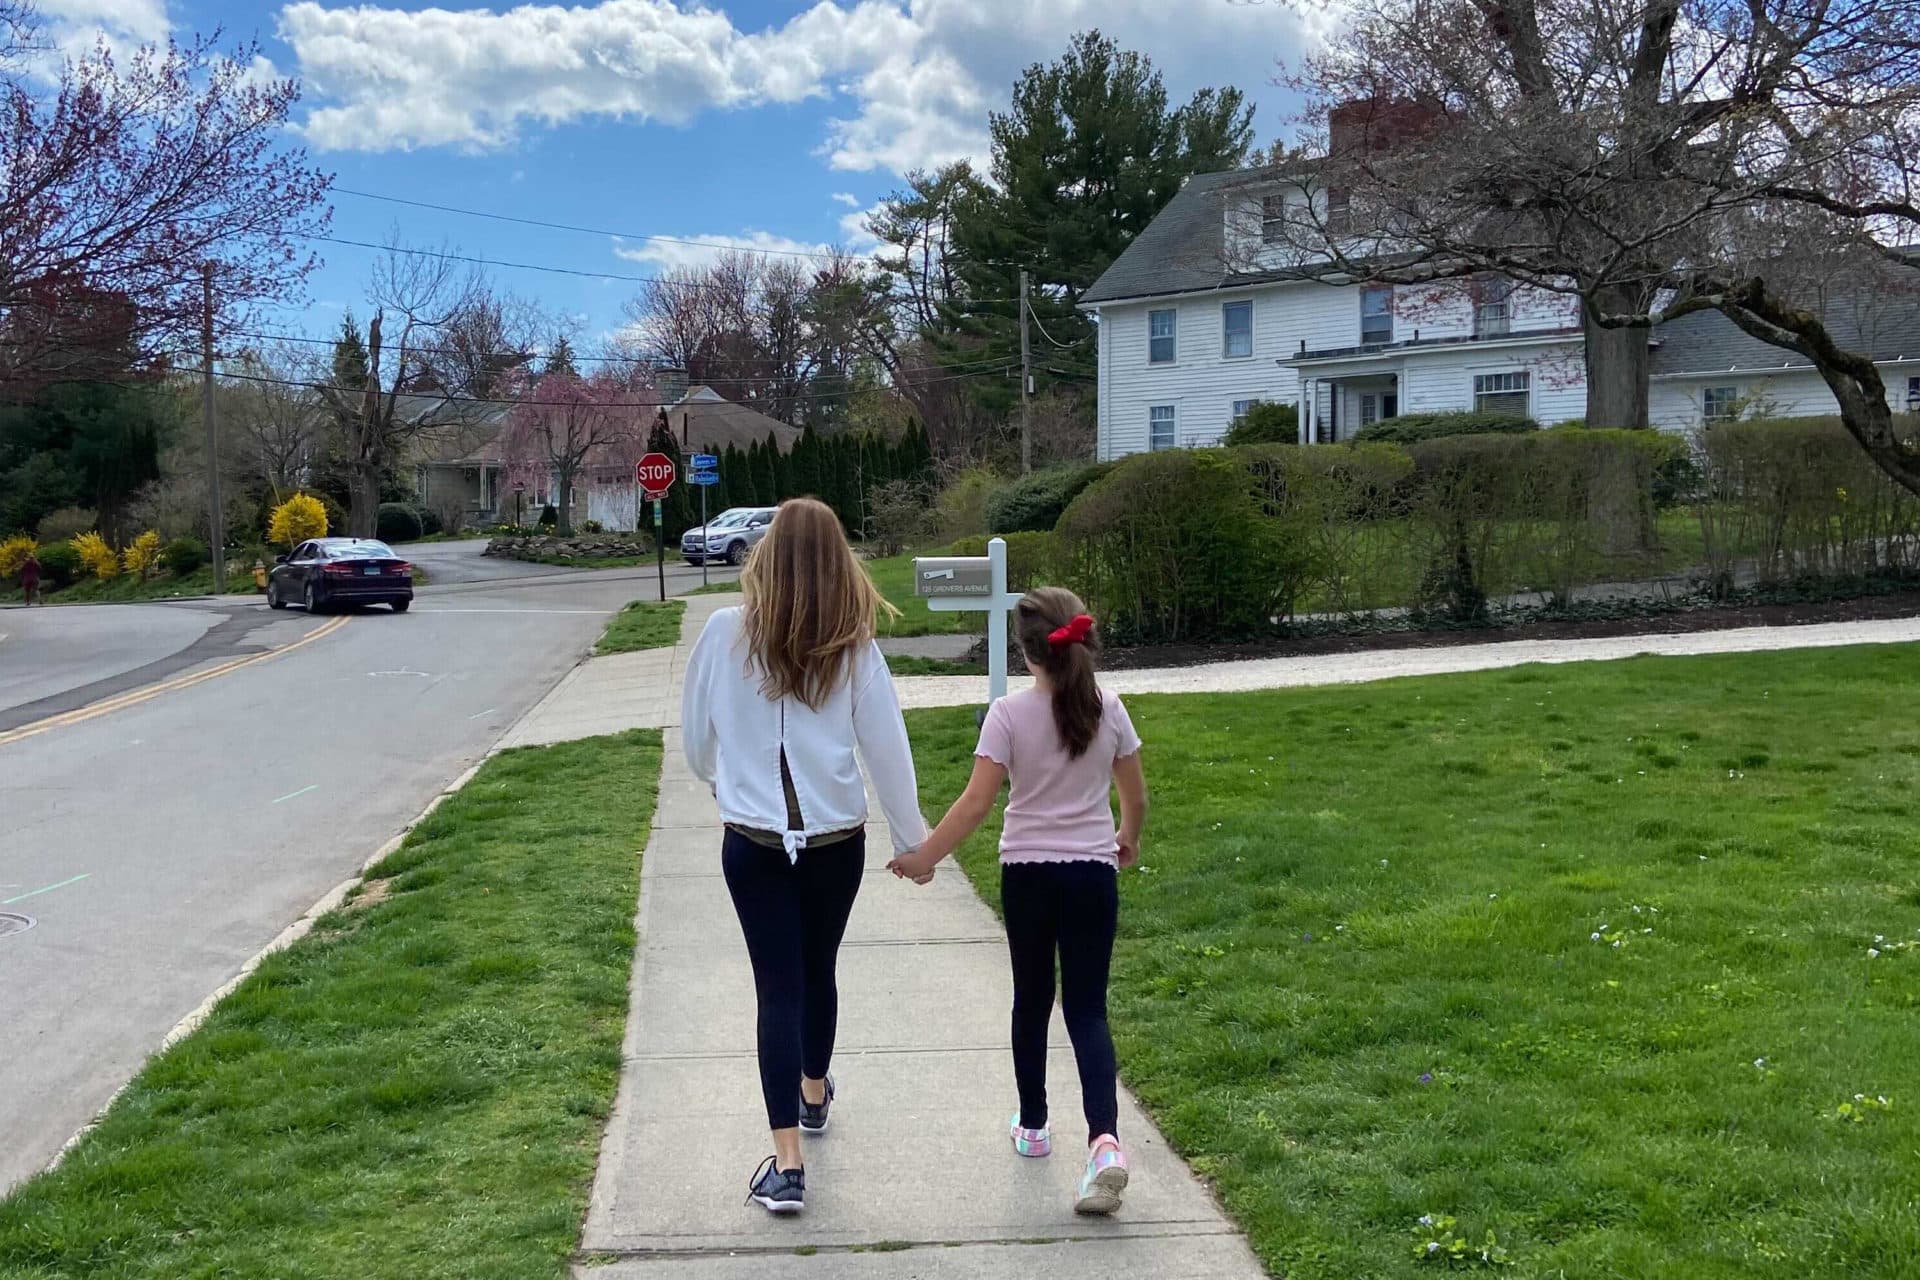 Ana Groves, left, walking with her daughter down a street. (Courtesy Ana Groves)